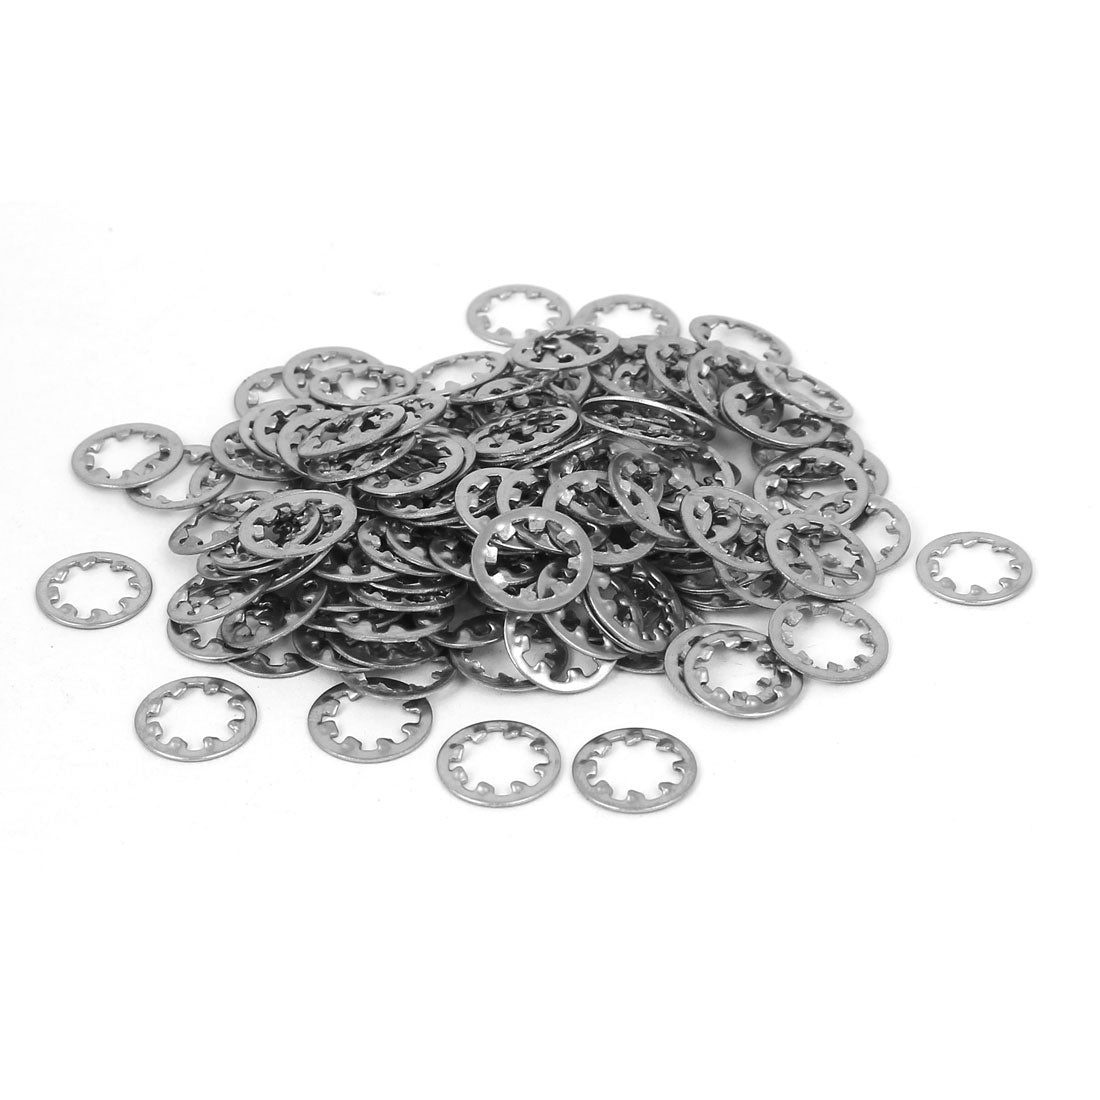 uxcell Uxcell M6 x 11mm x 1mm 304 Stainless Steel Internal Tooth Star Washers 50 Pcs